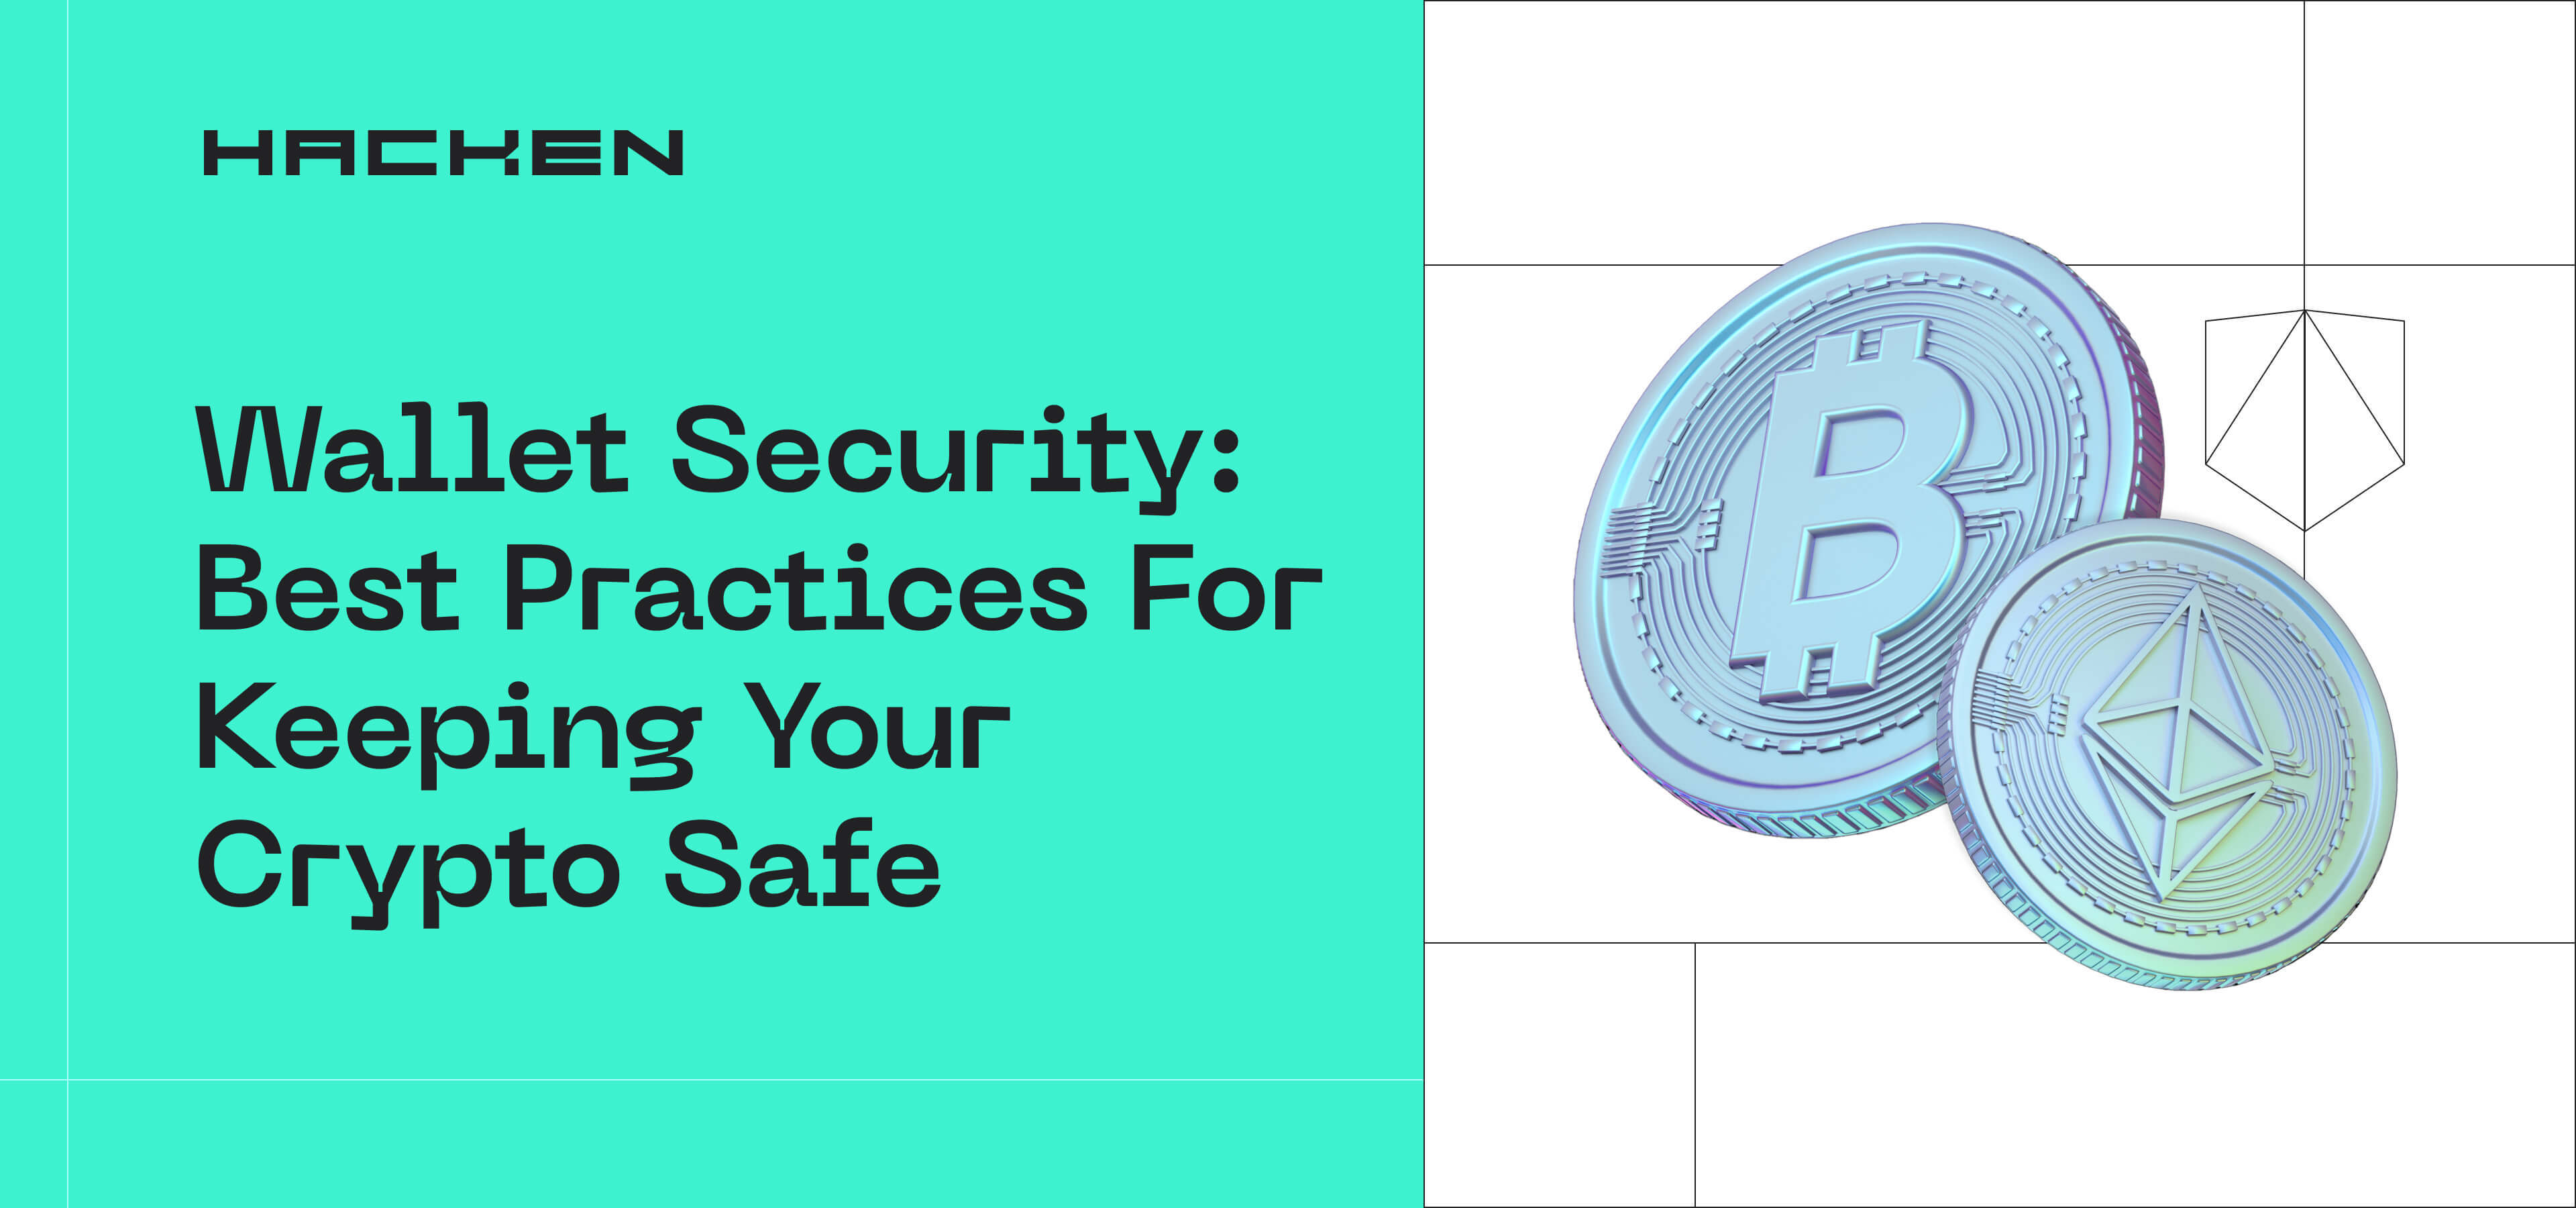 Wallet Security: Best Practices For Keeping Your Crypto Safe